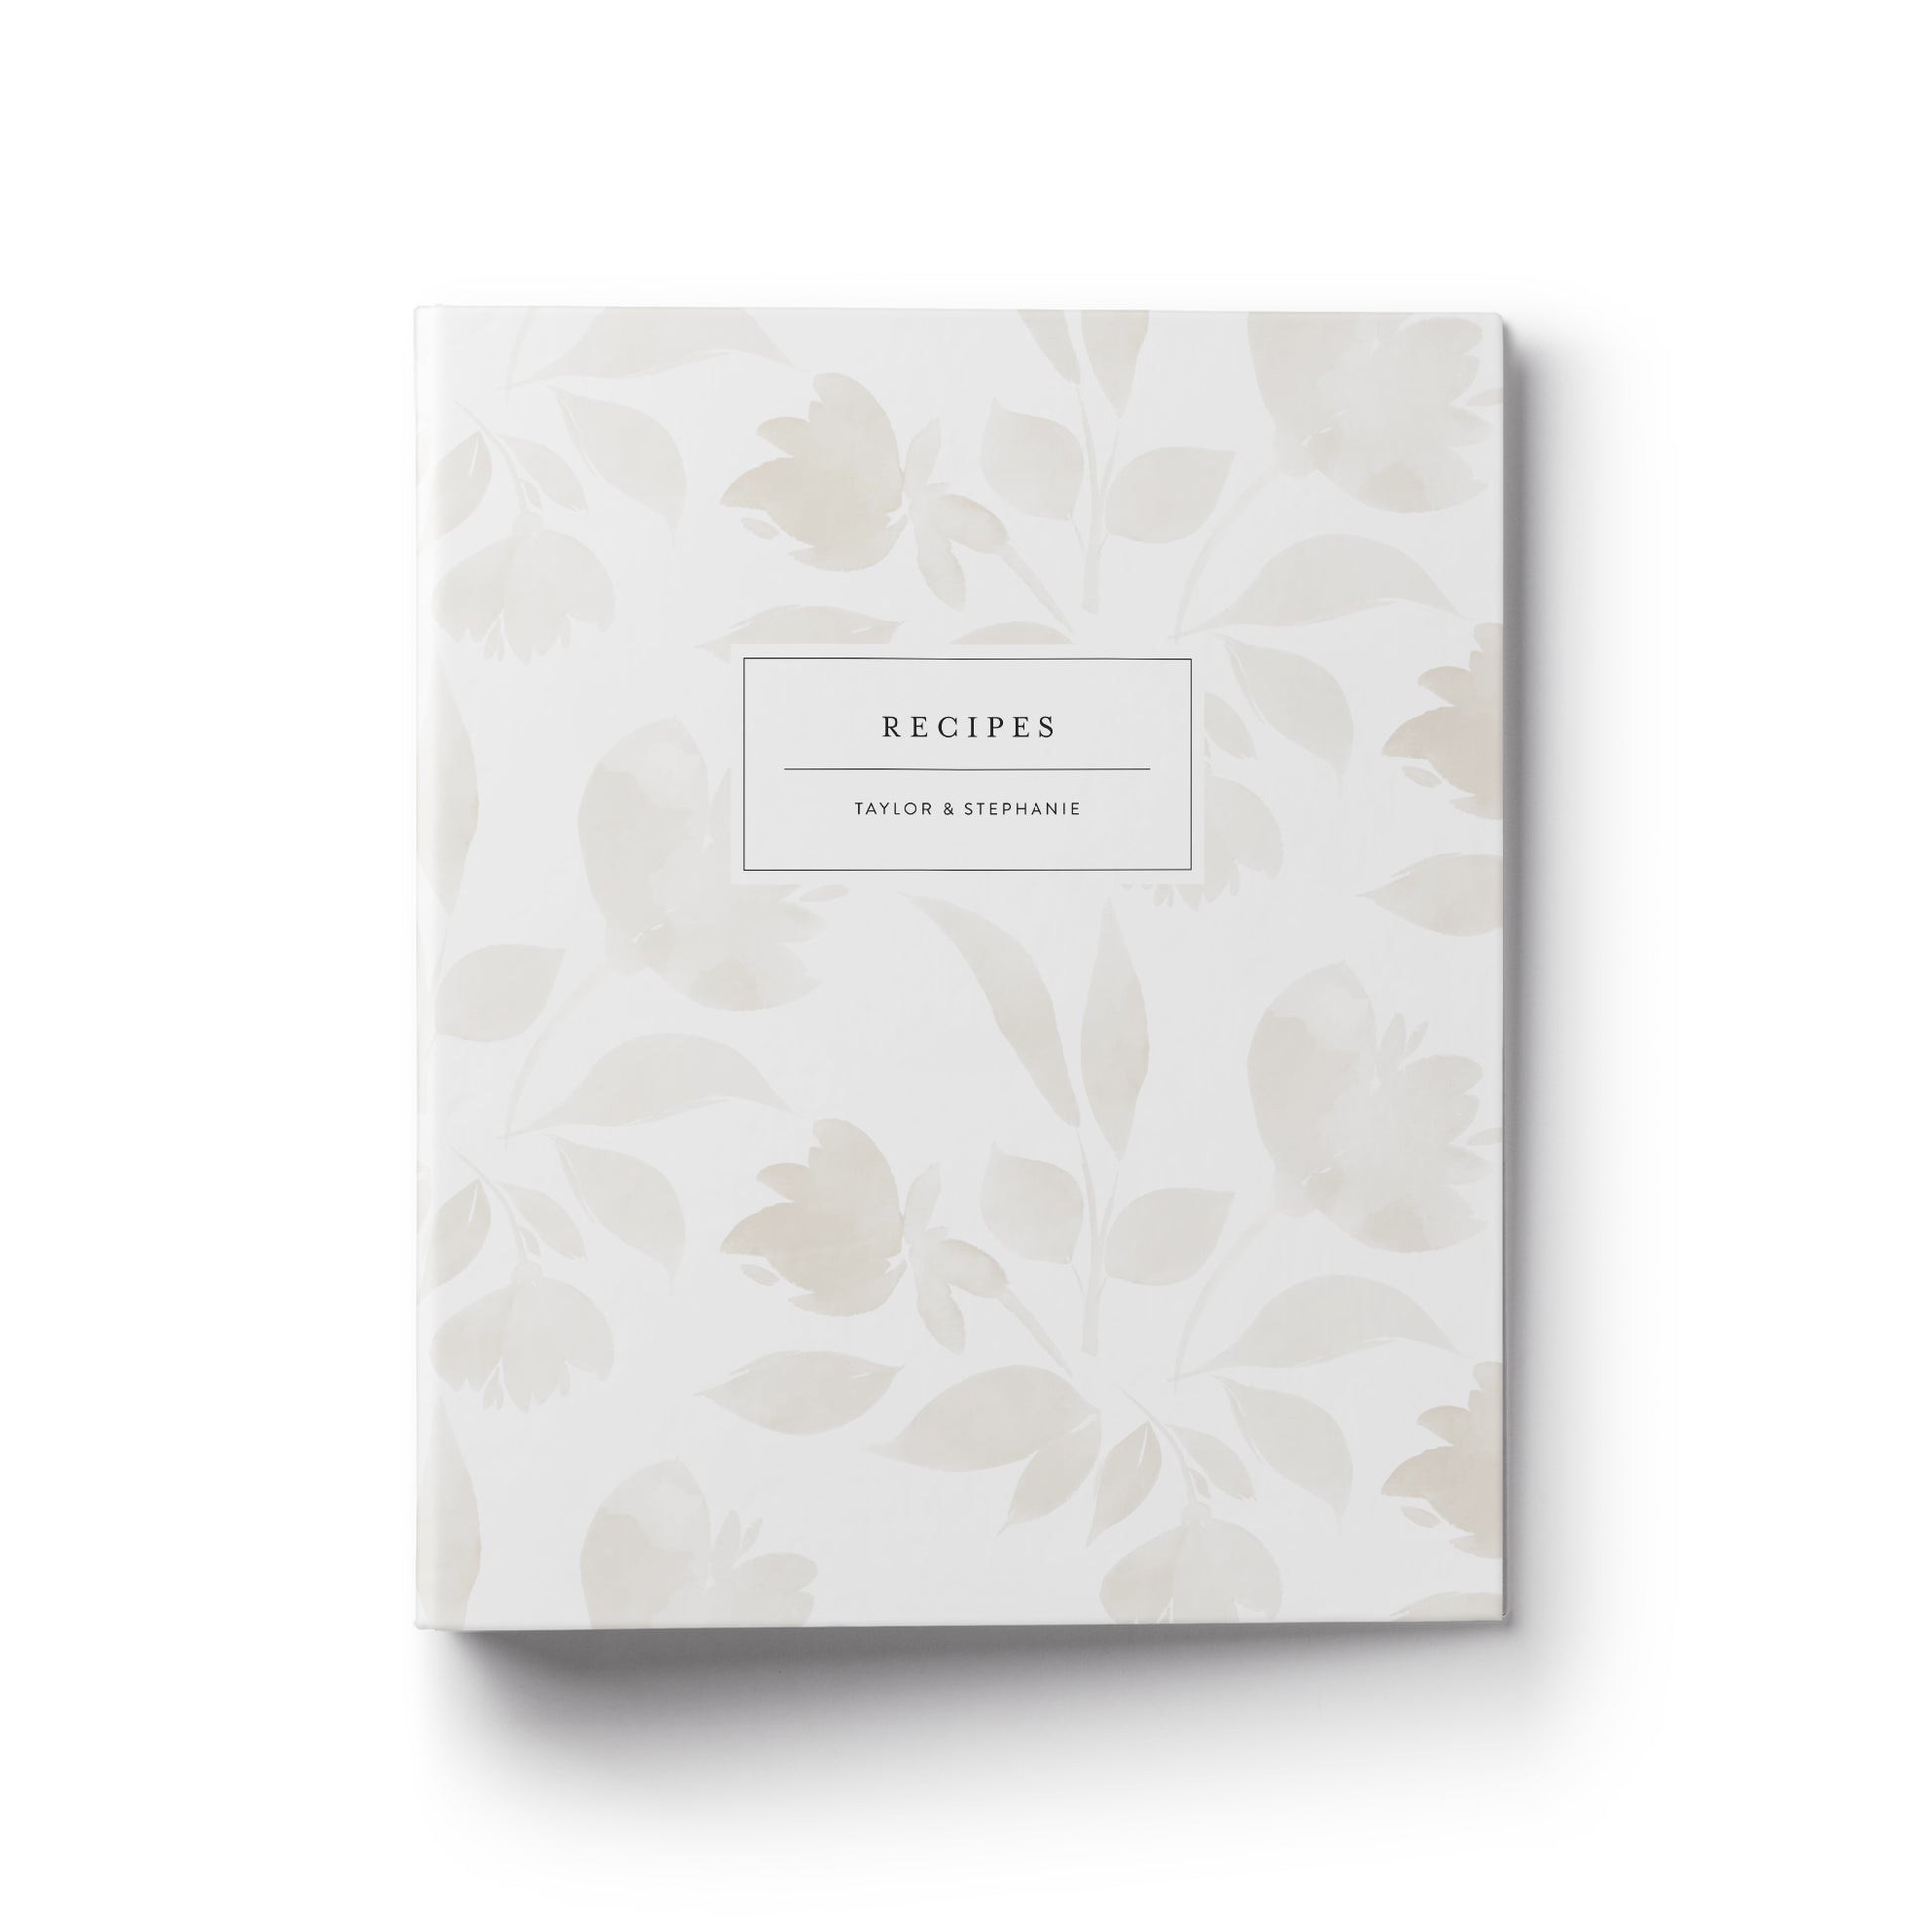 A watercolor floral custom recipe binder makes the perfect gift for any occasion